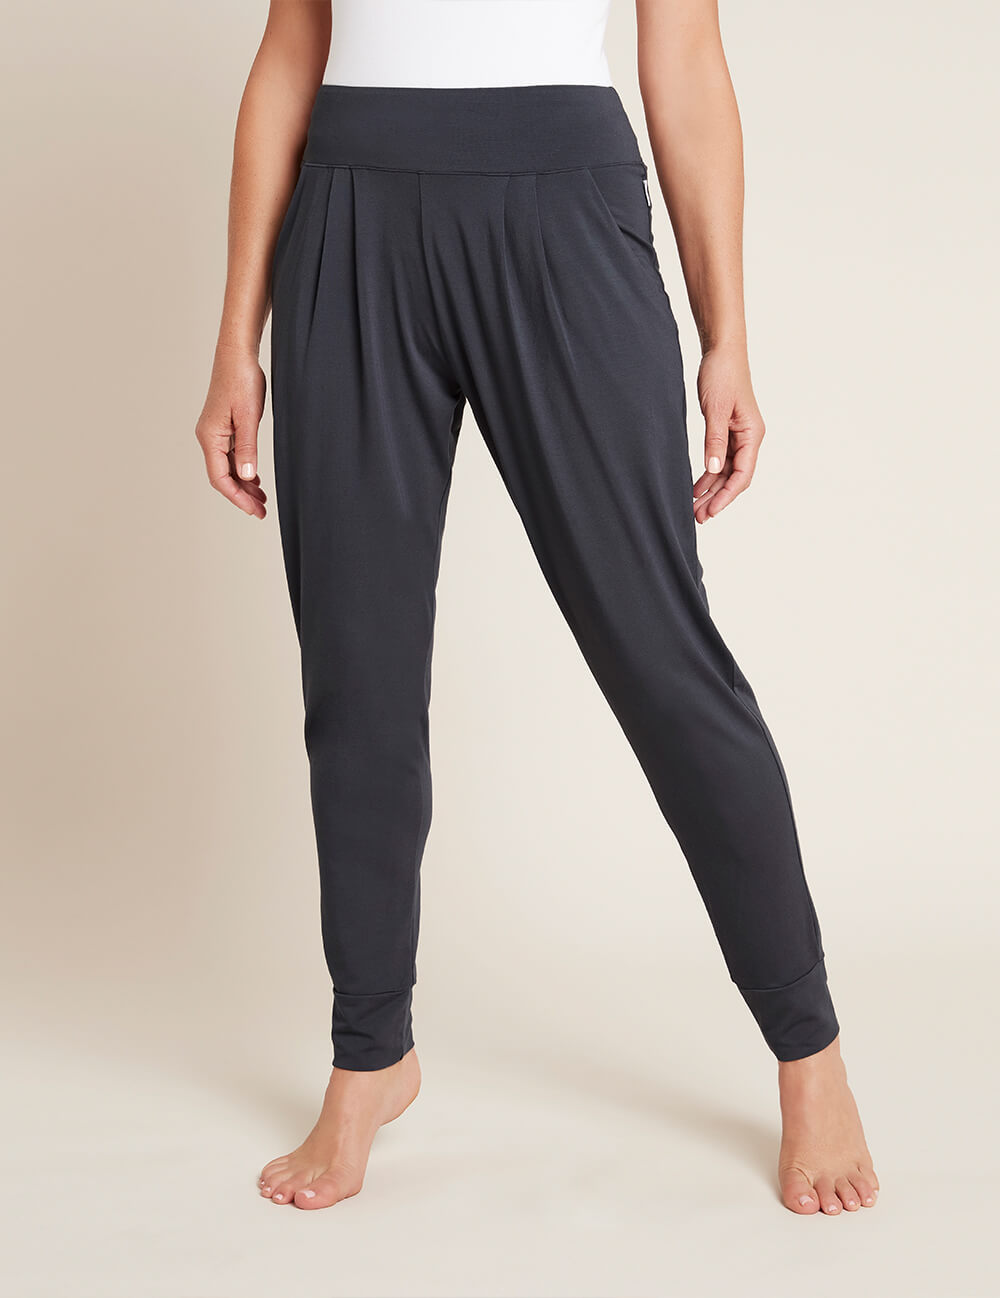 Boody Women's Downtime Lounge Pants in Storm Front